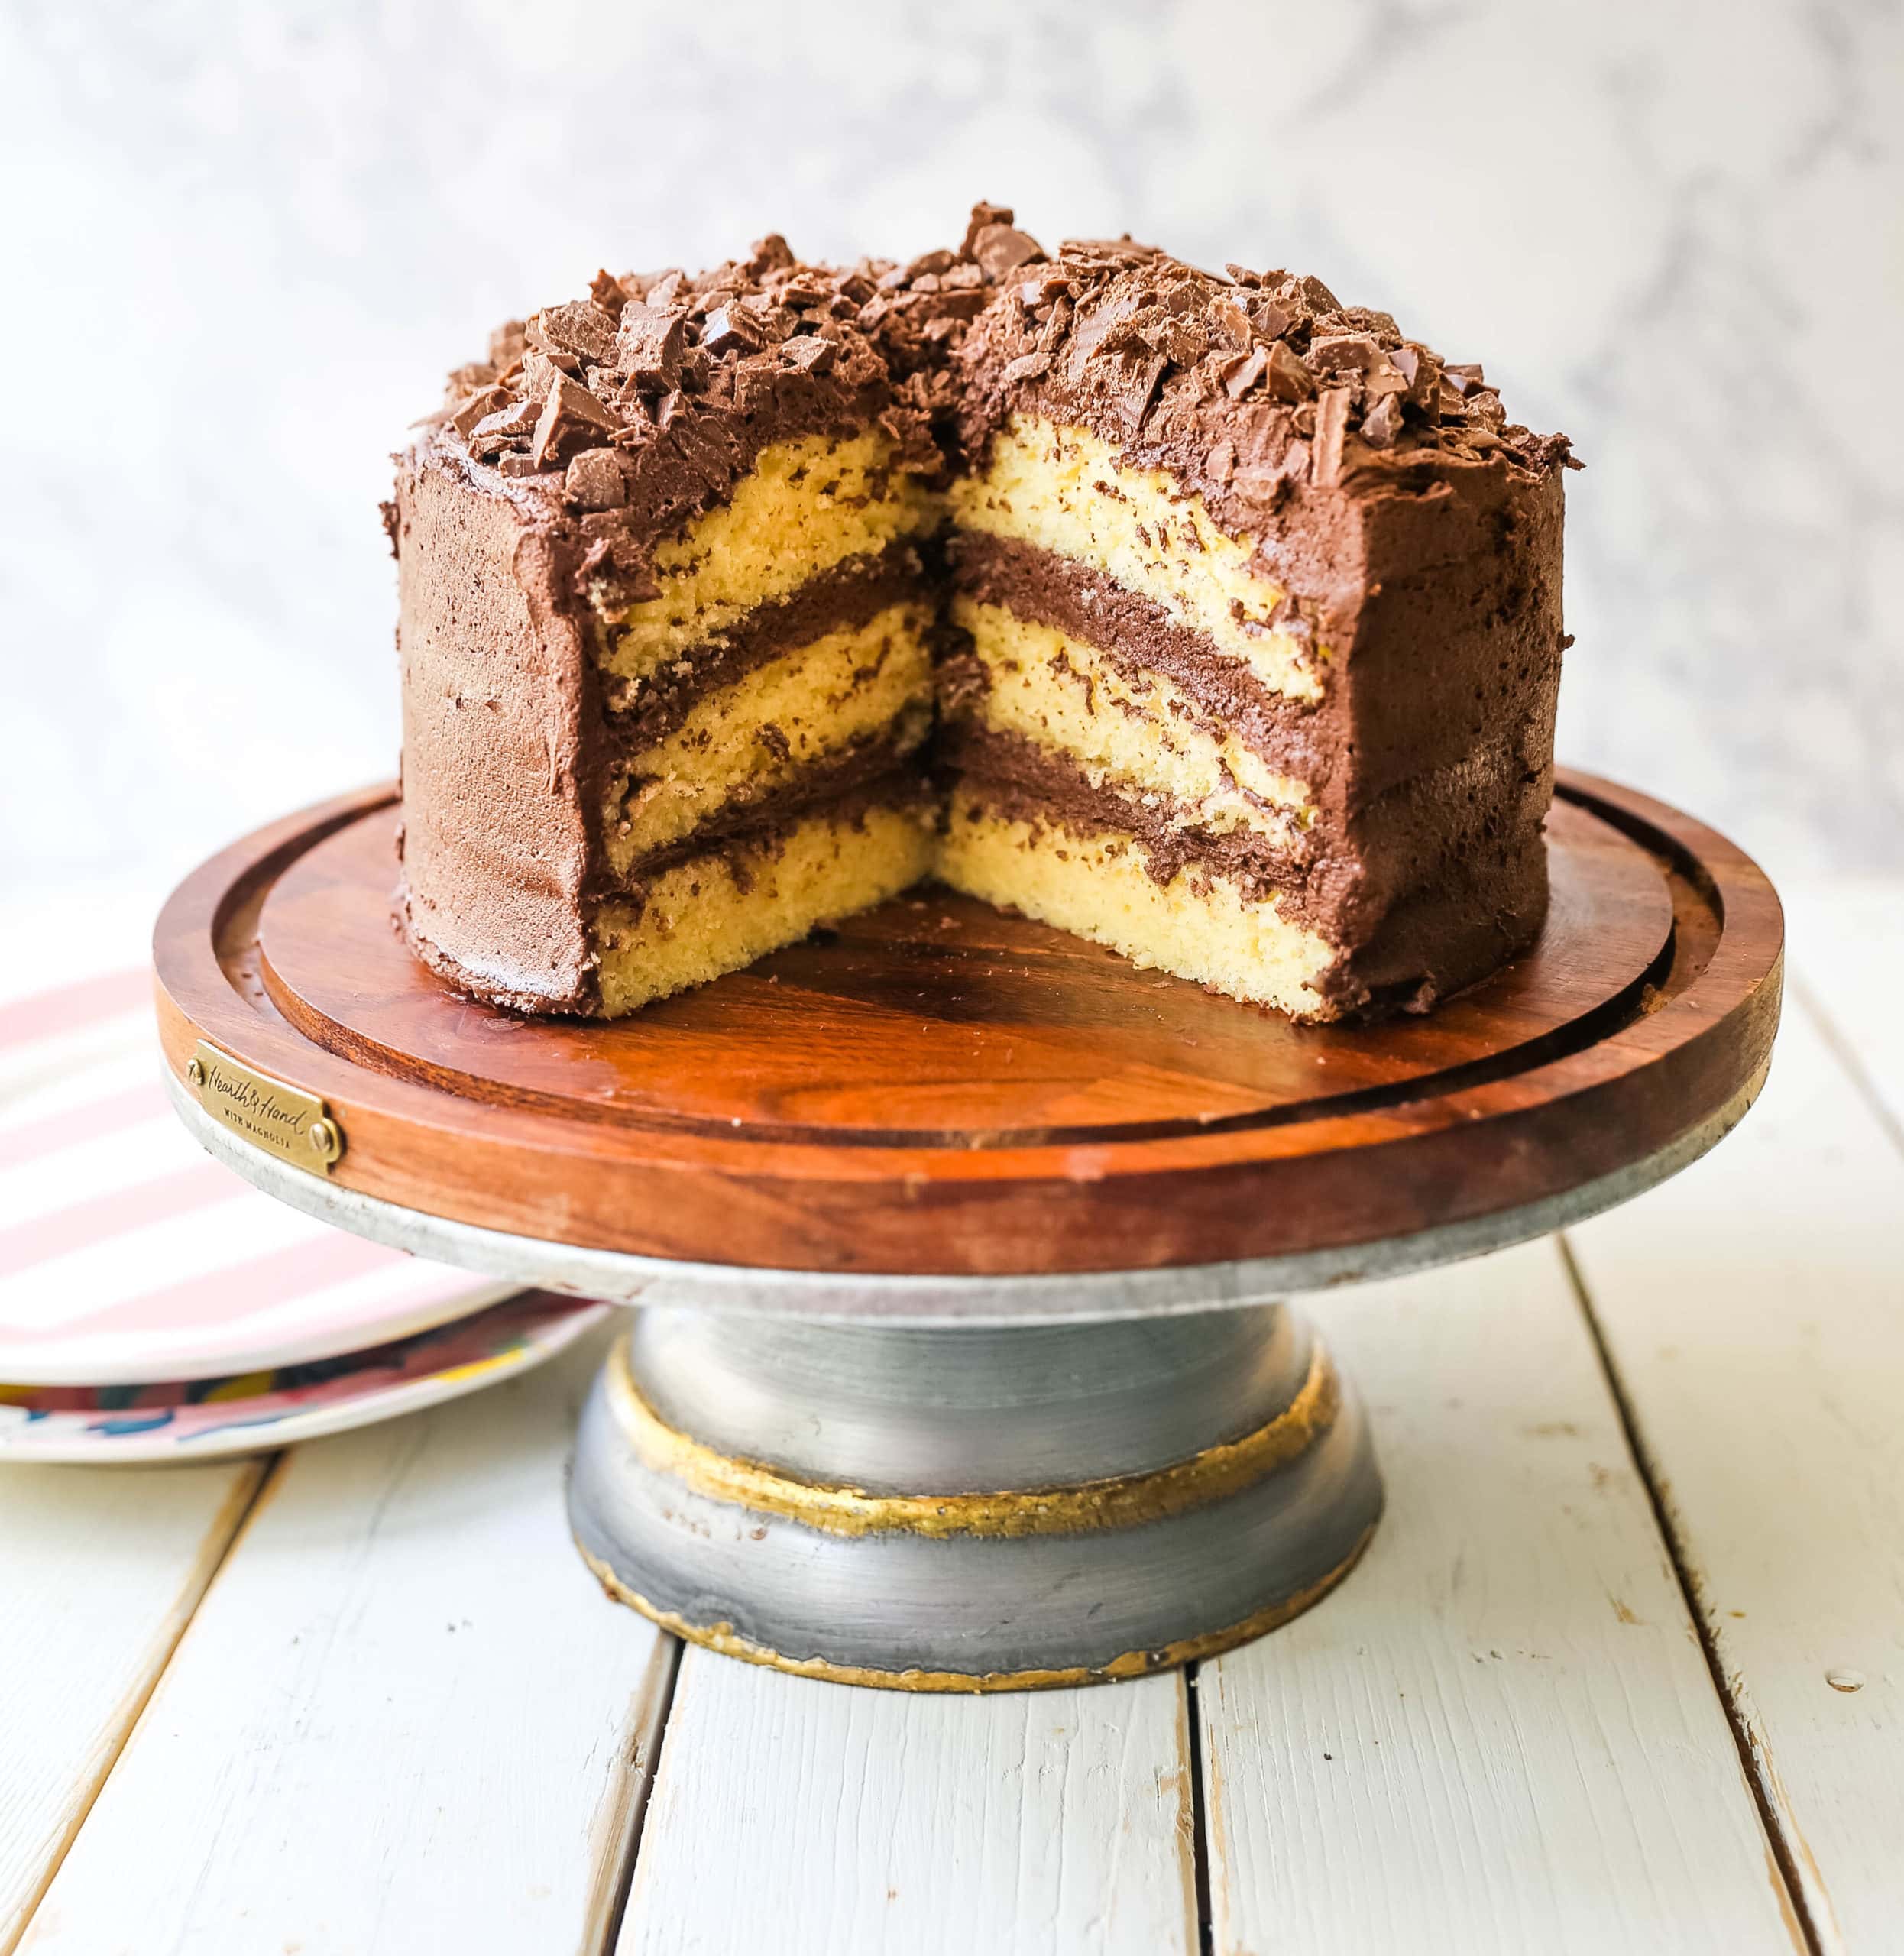 https://www.modernhoney.com/wp-content/uploads/2016/12/Yellow-Cake-with-Chocolate-Frosting-11-scaled.jpg